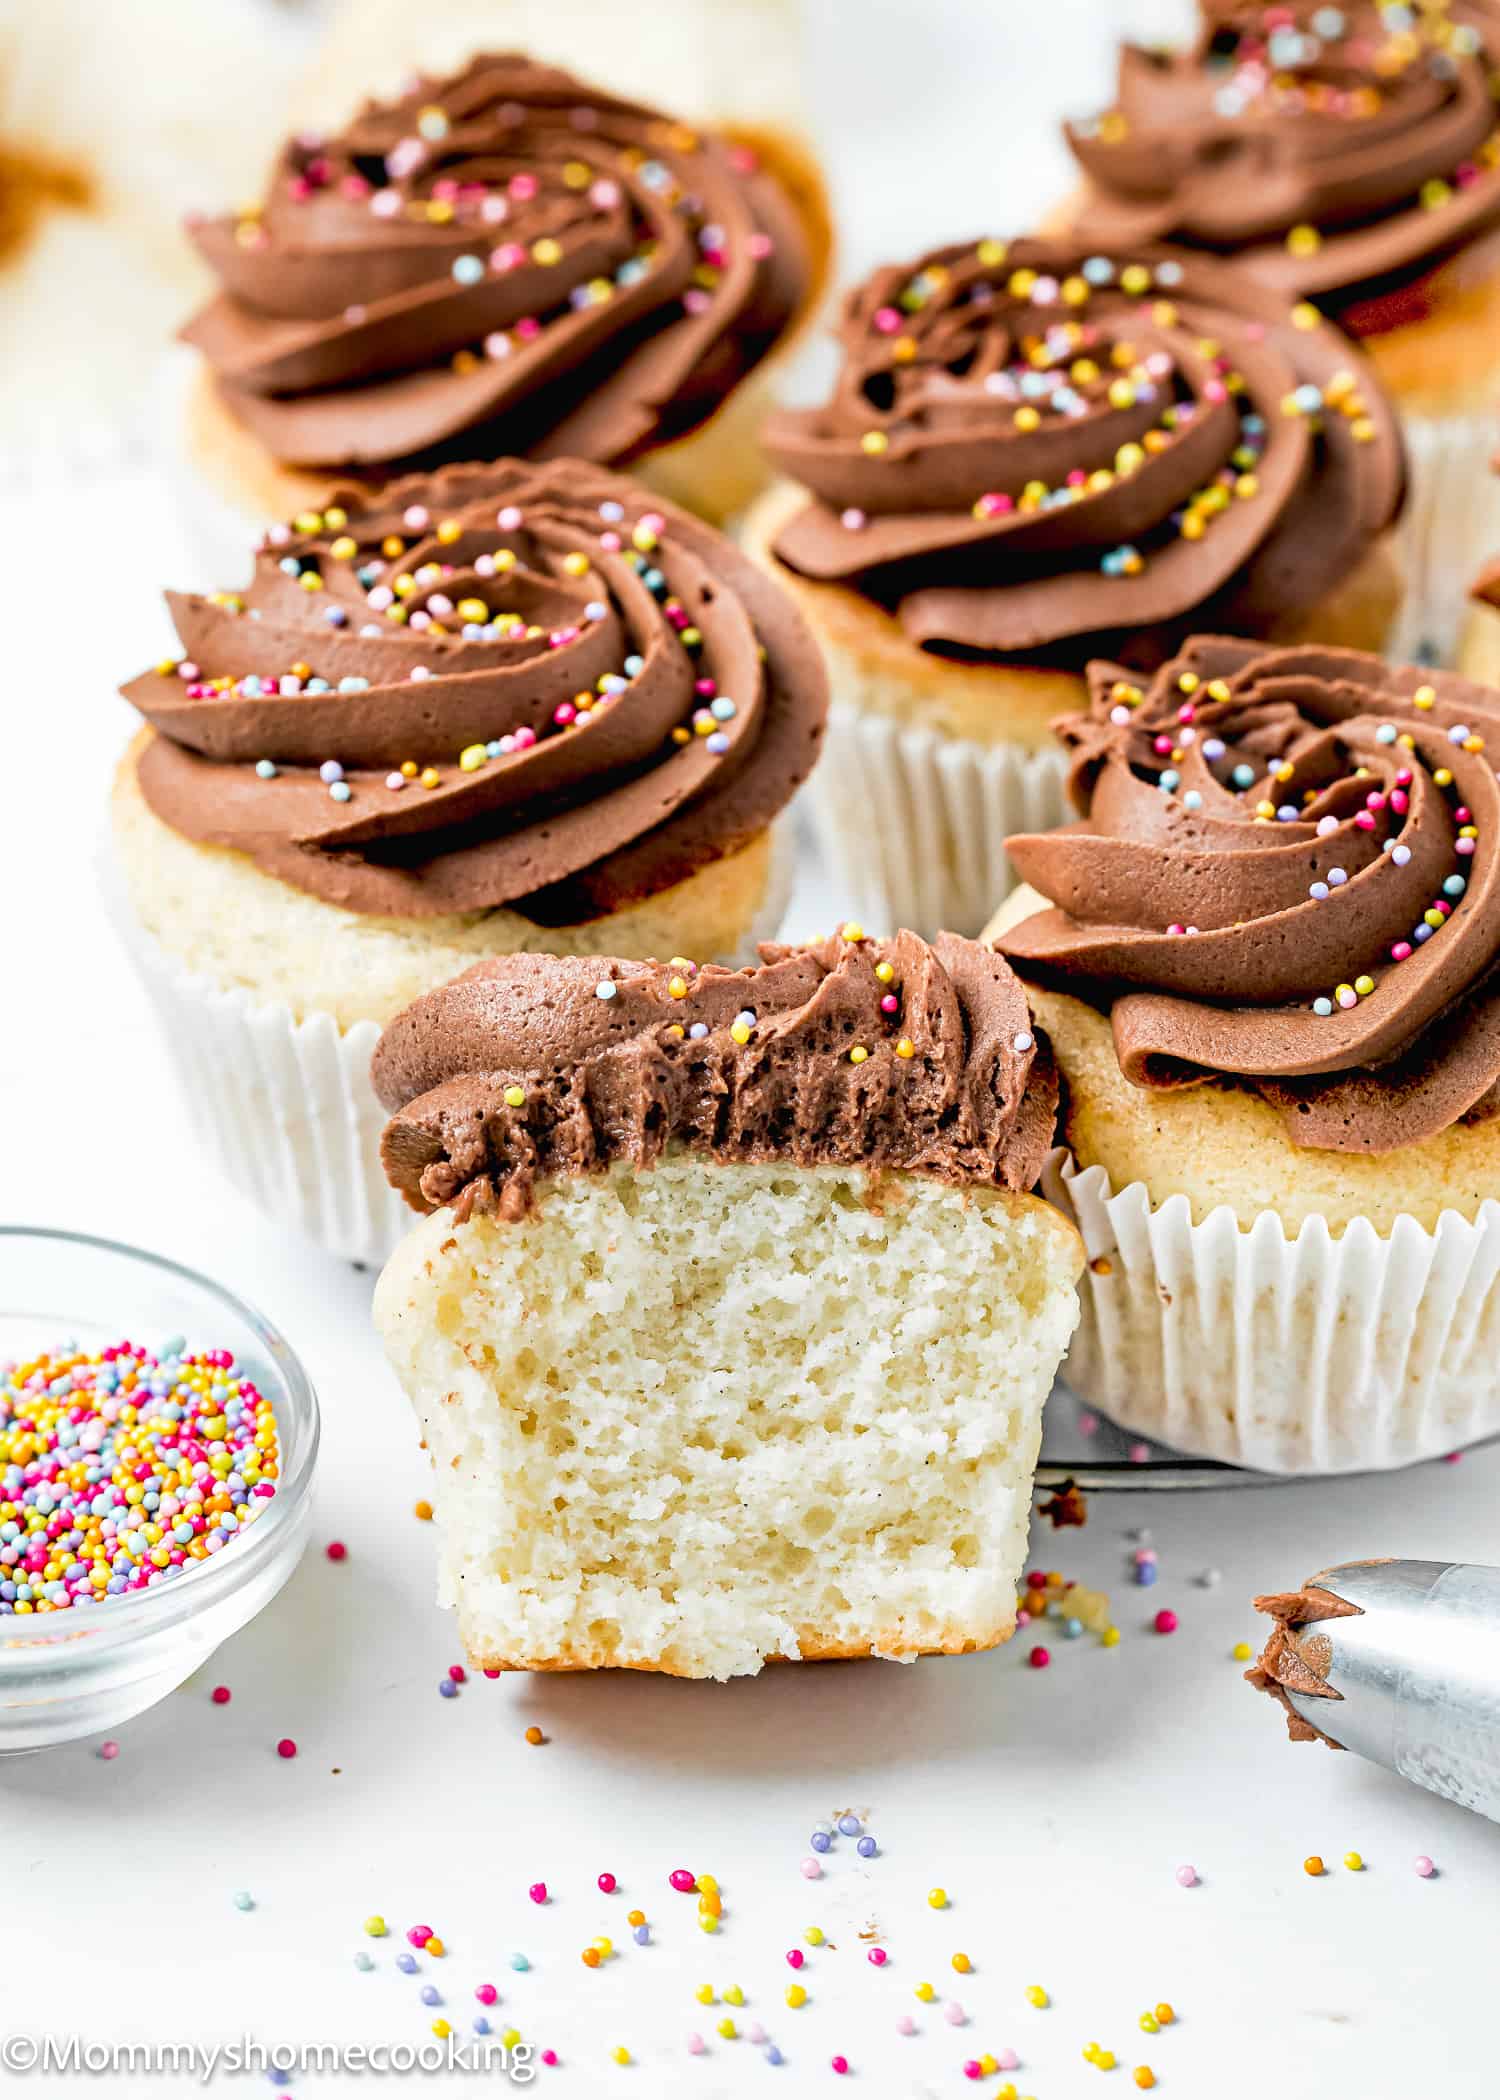 Easy Fluffy Vanilla Cupcake (Dairy-Free, Egg-Free, Vegan) cut into half showing its inside texture with chocolate frosting and sprinkles.